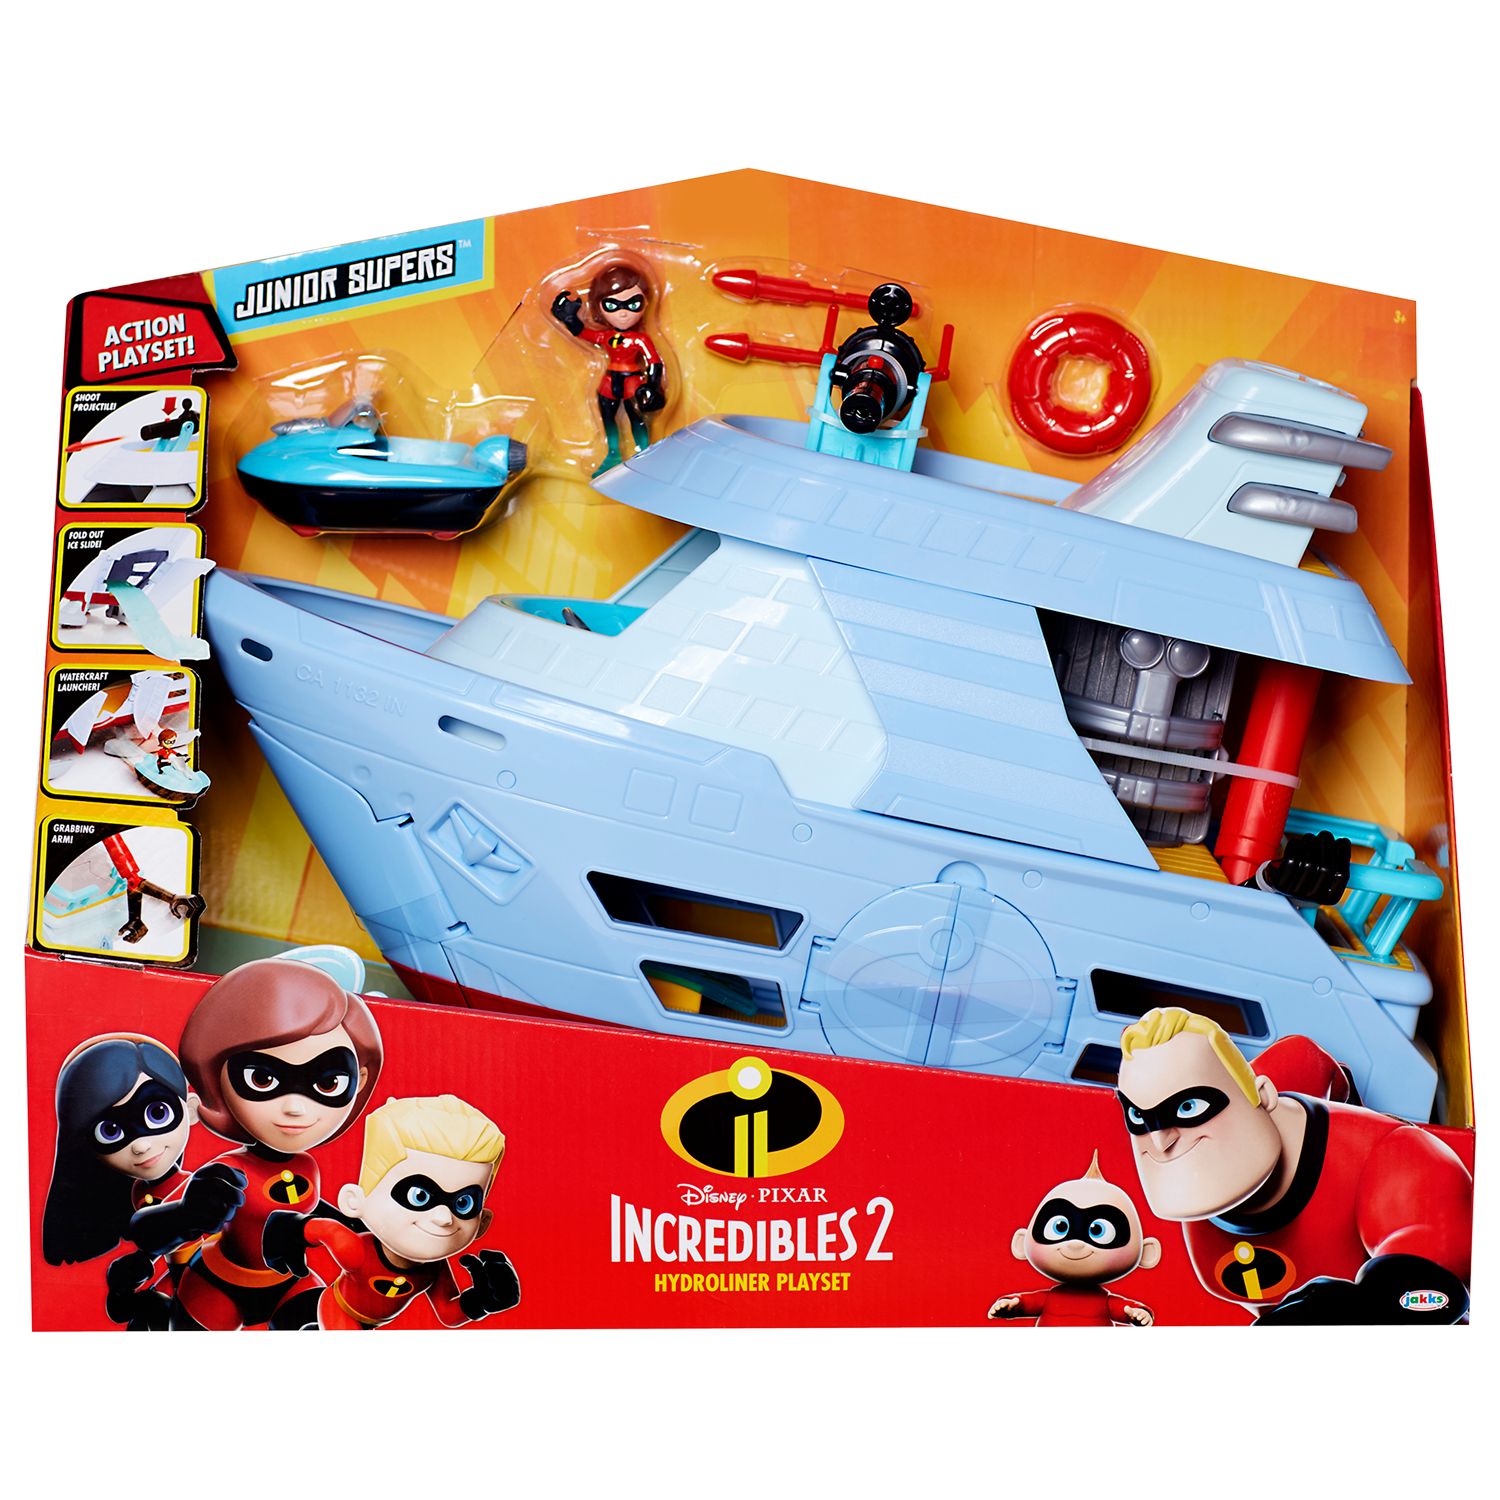 The Incredibles 2 Hydroliner Playset 